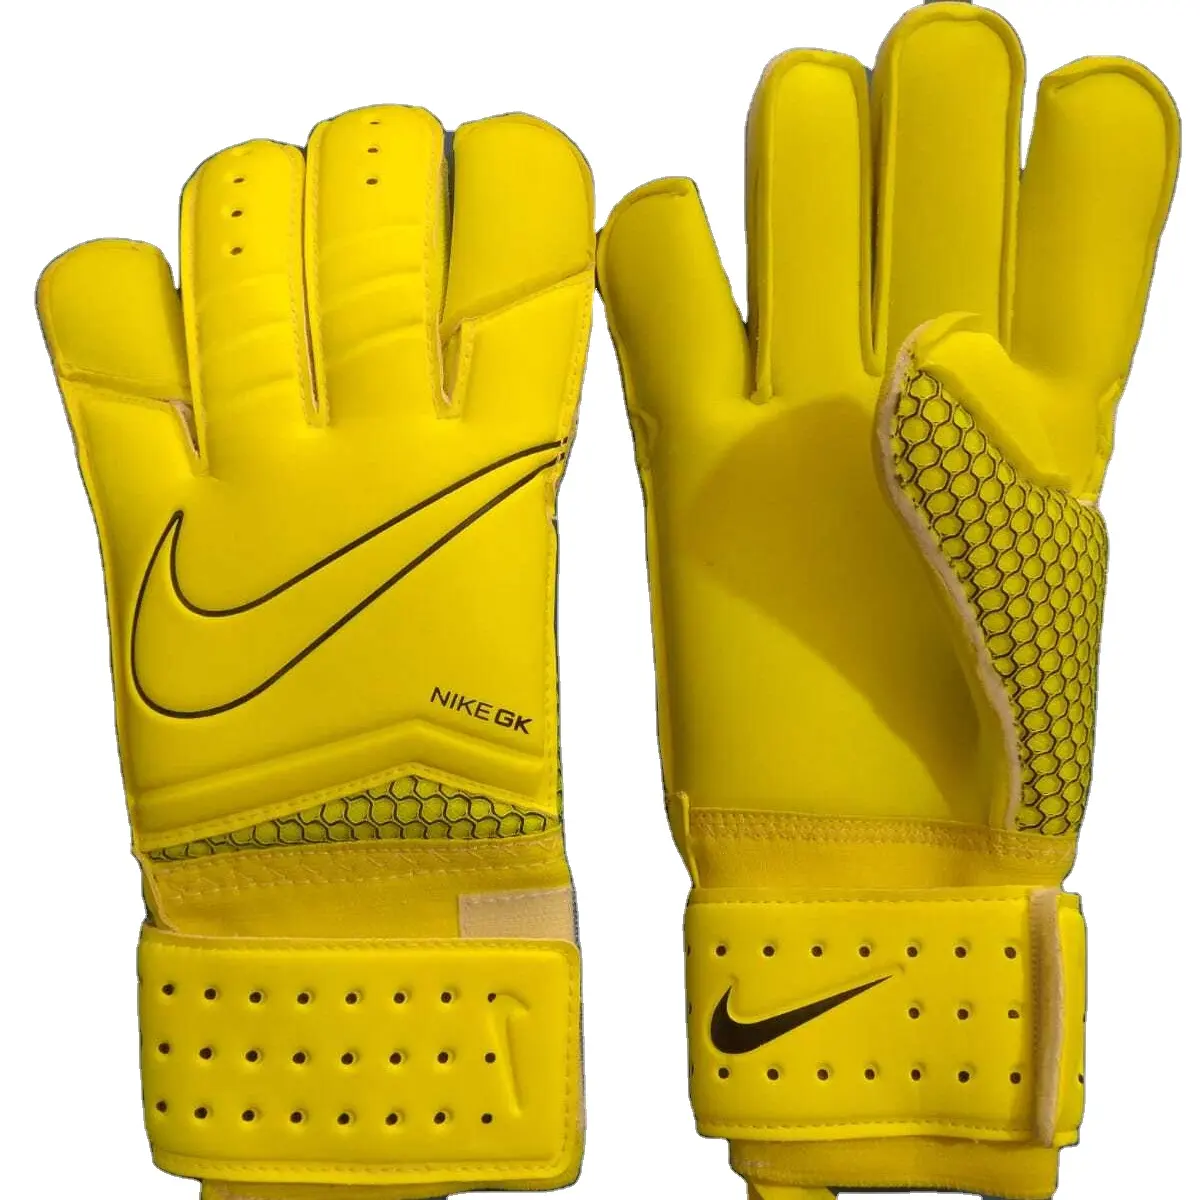 Adults professional Front Palm Giga German Latex Goalkeeper best for football and Soccer training 2020 Cheapest Wholesale Price